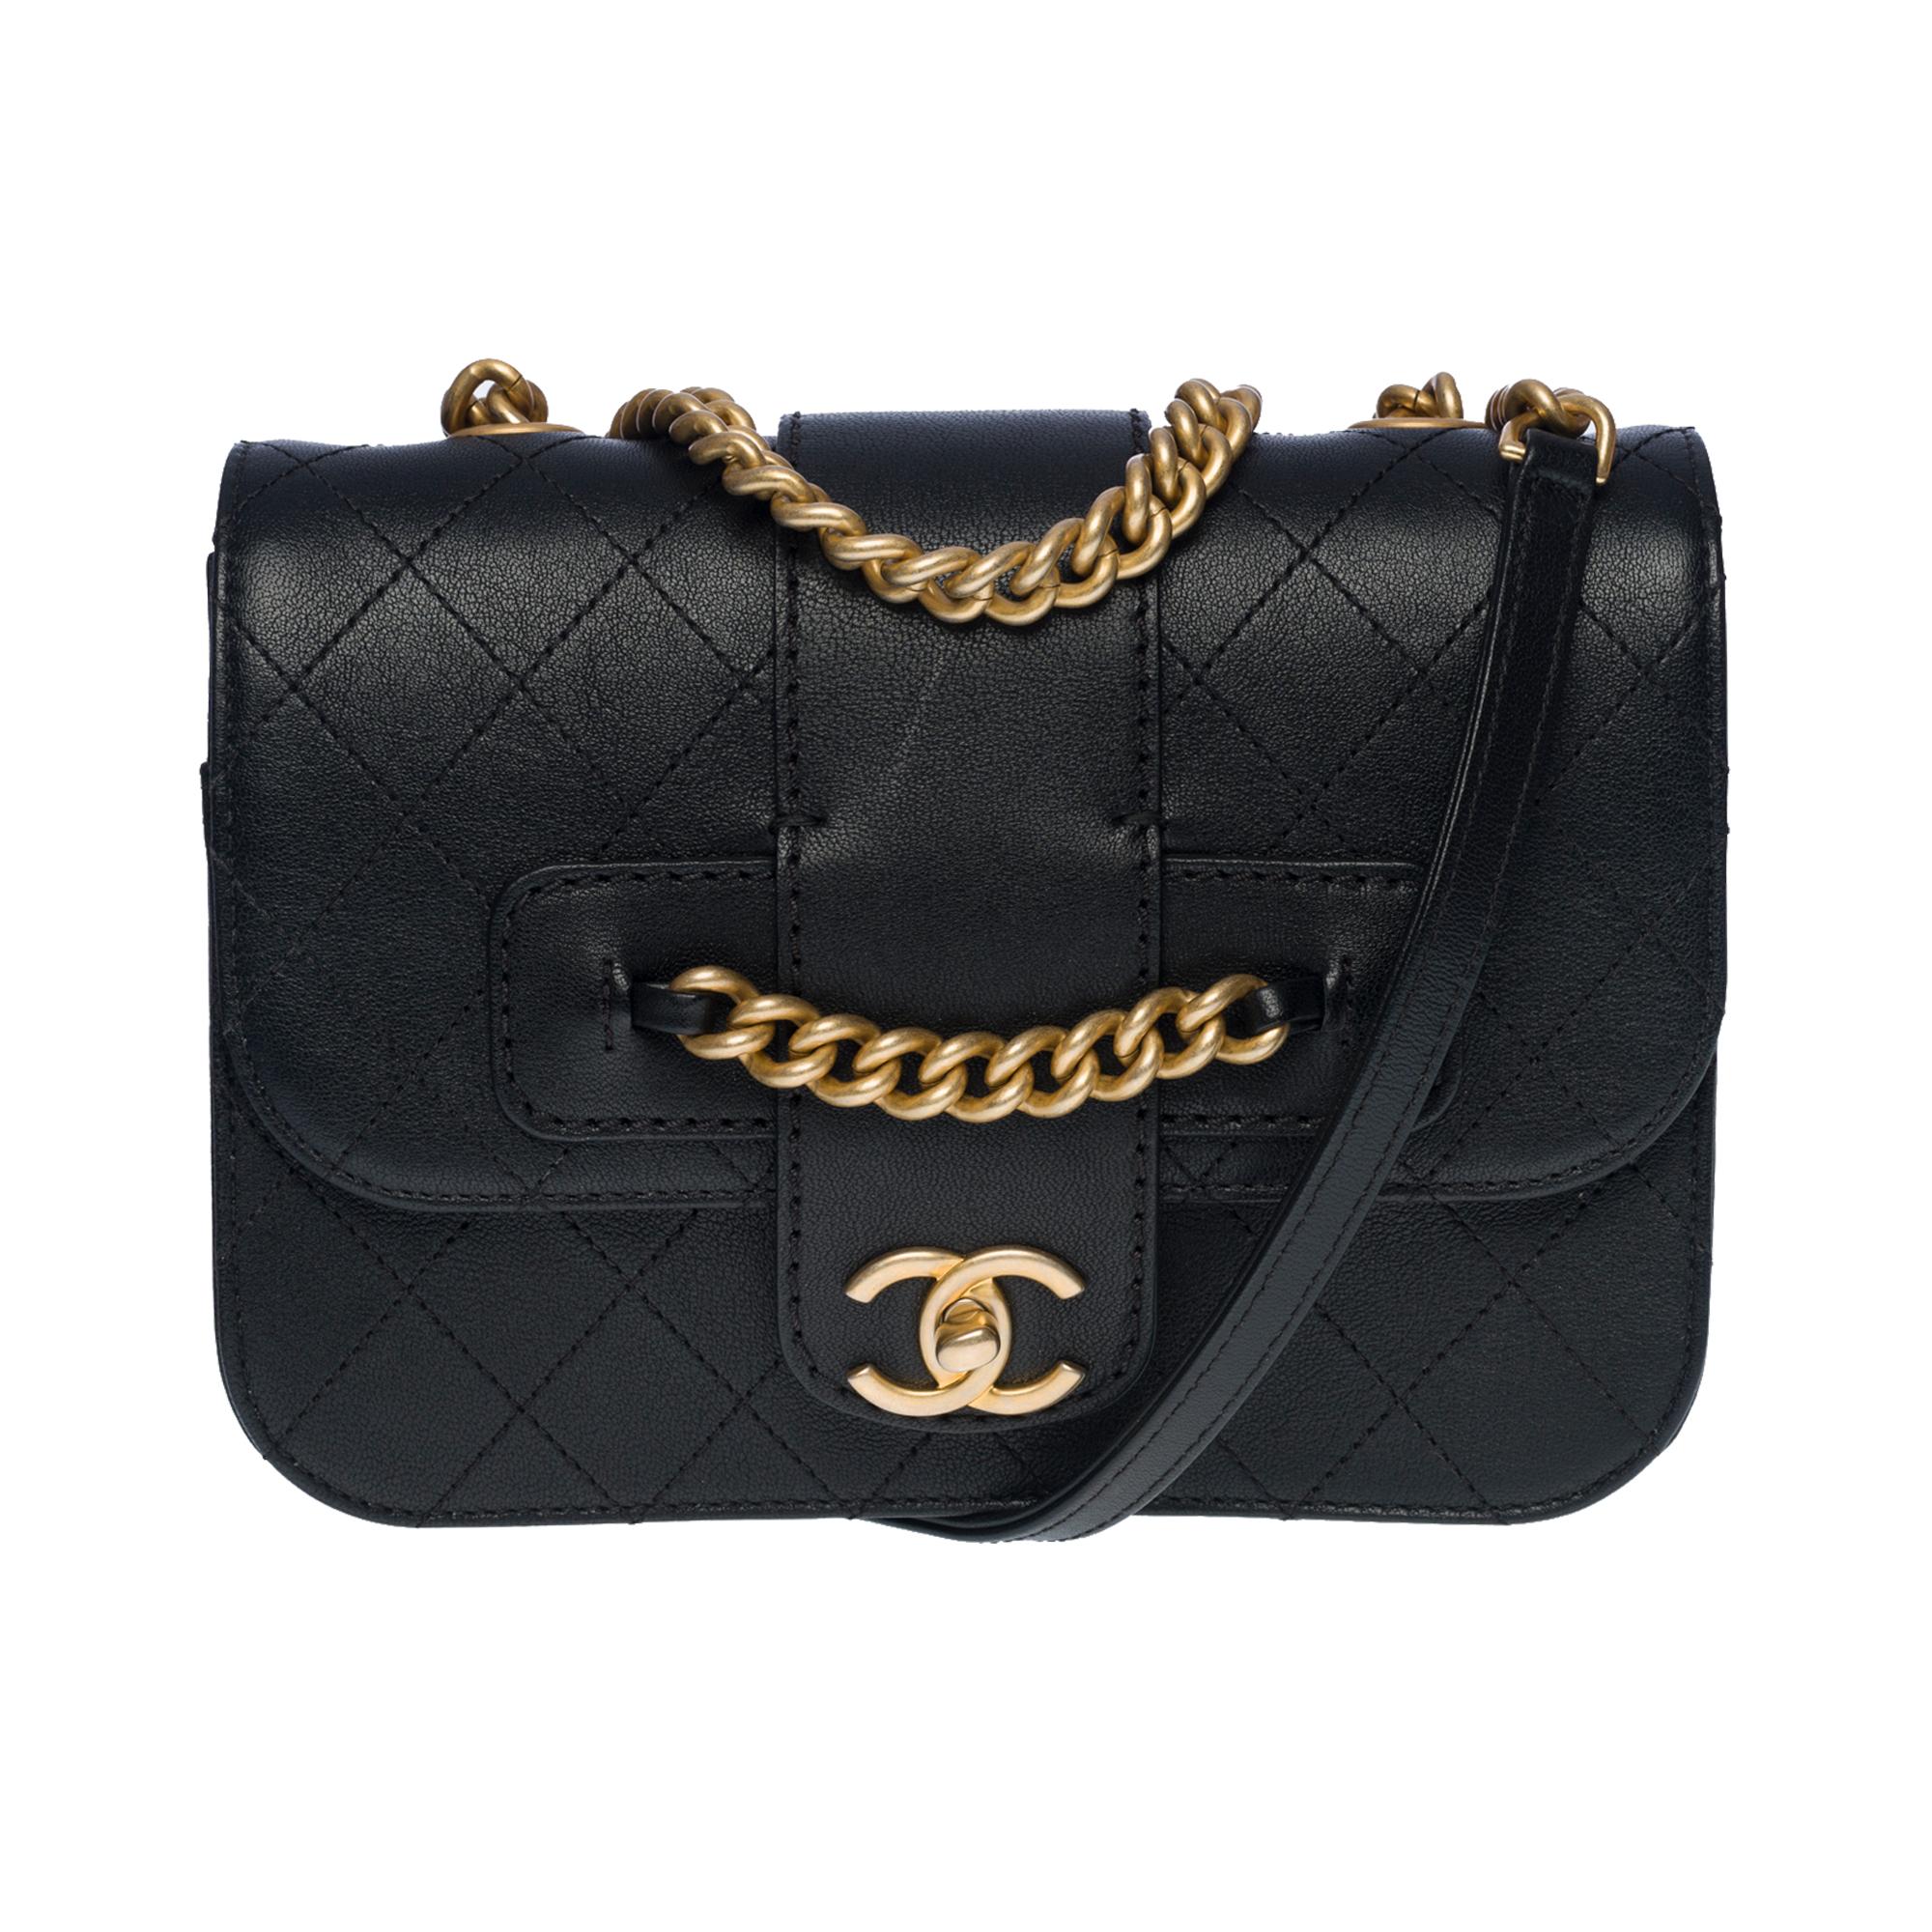 Splendid and Rare limited edition Chanel Classic Flap bag in black leather, matt gold-plated metal hardware, a matt gold-plated metal and black leather chain that allows a shoulder and shoulder strap 

Backpack pocket 
Closing by a band on the flap,